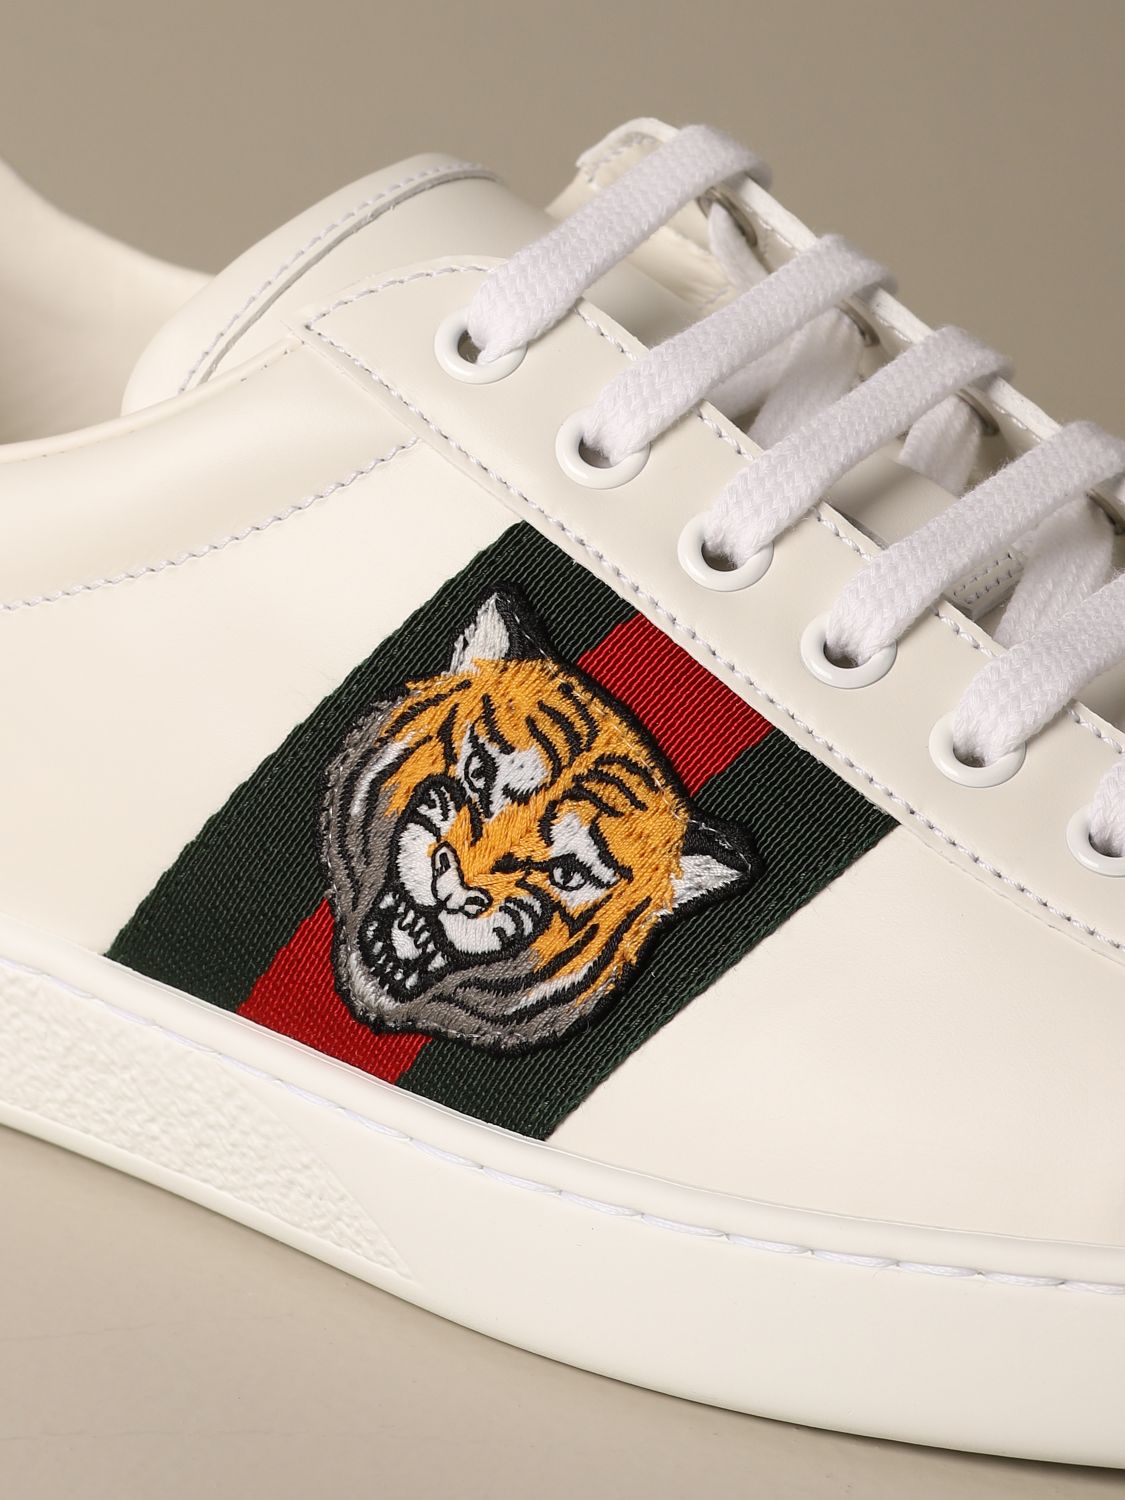 white tiger ace sneakers